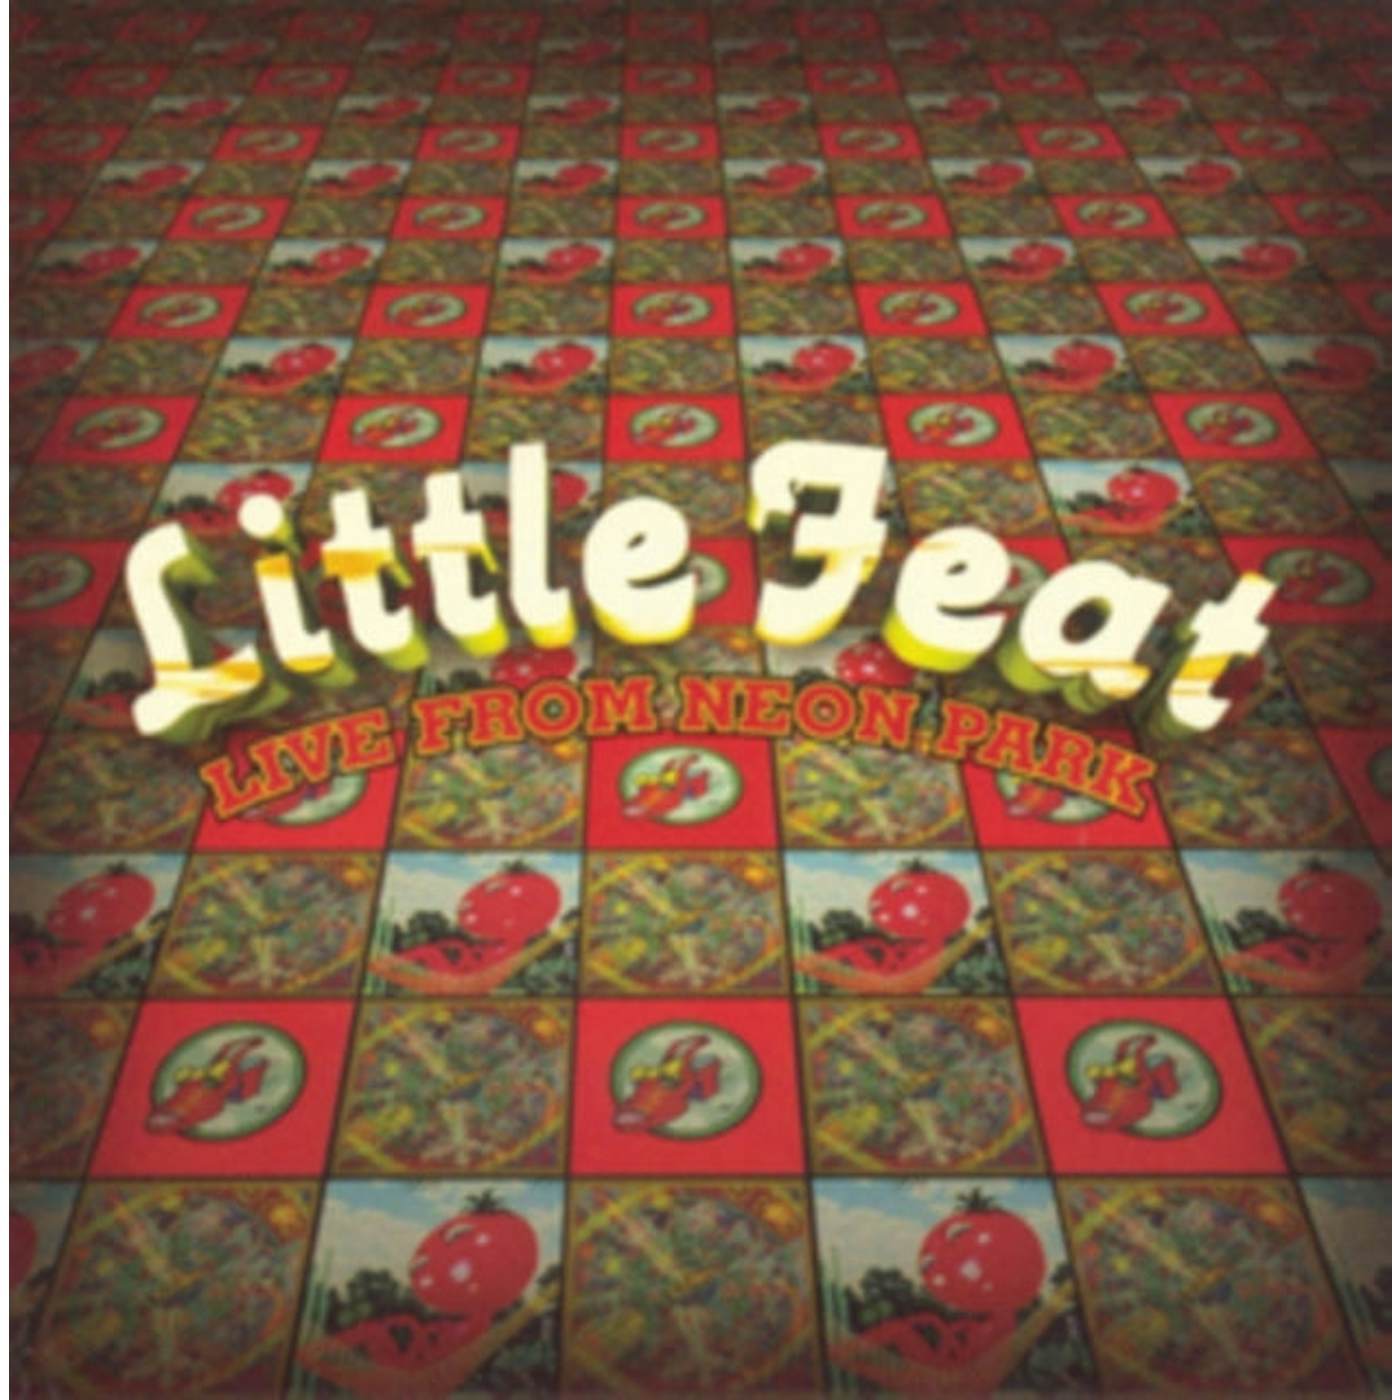 Little Feat CD - Live From Neon Park